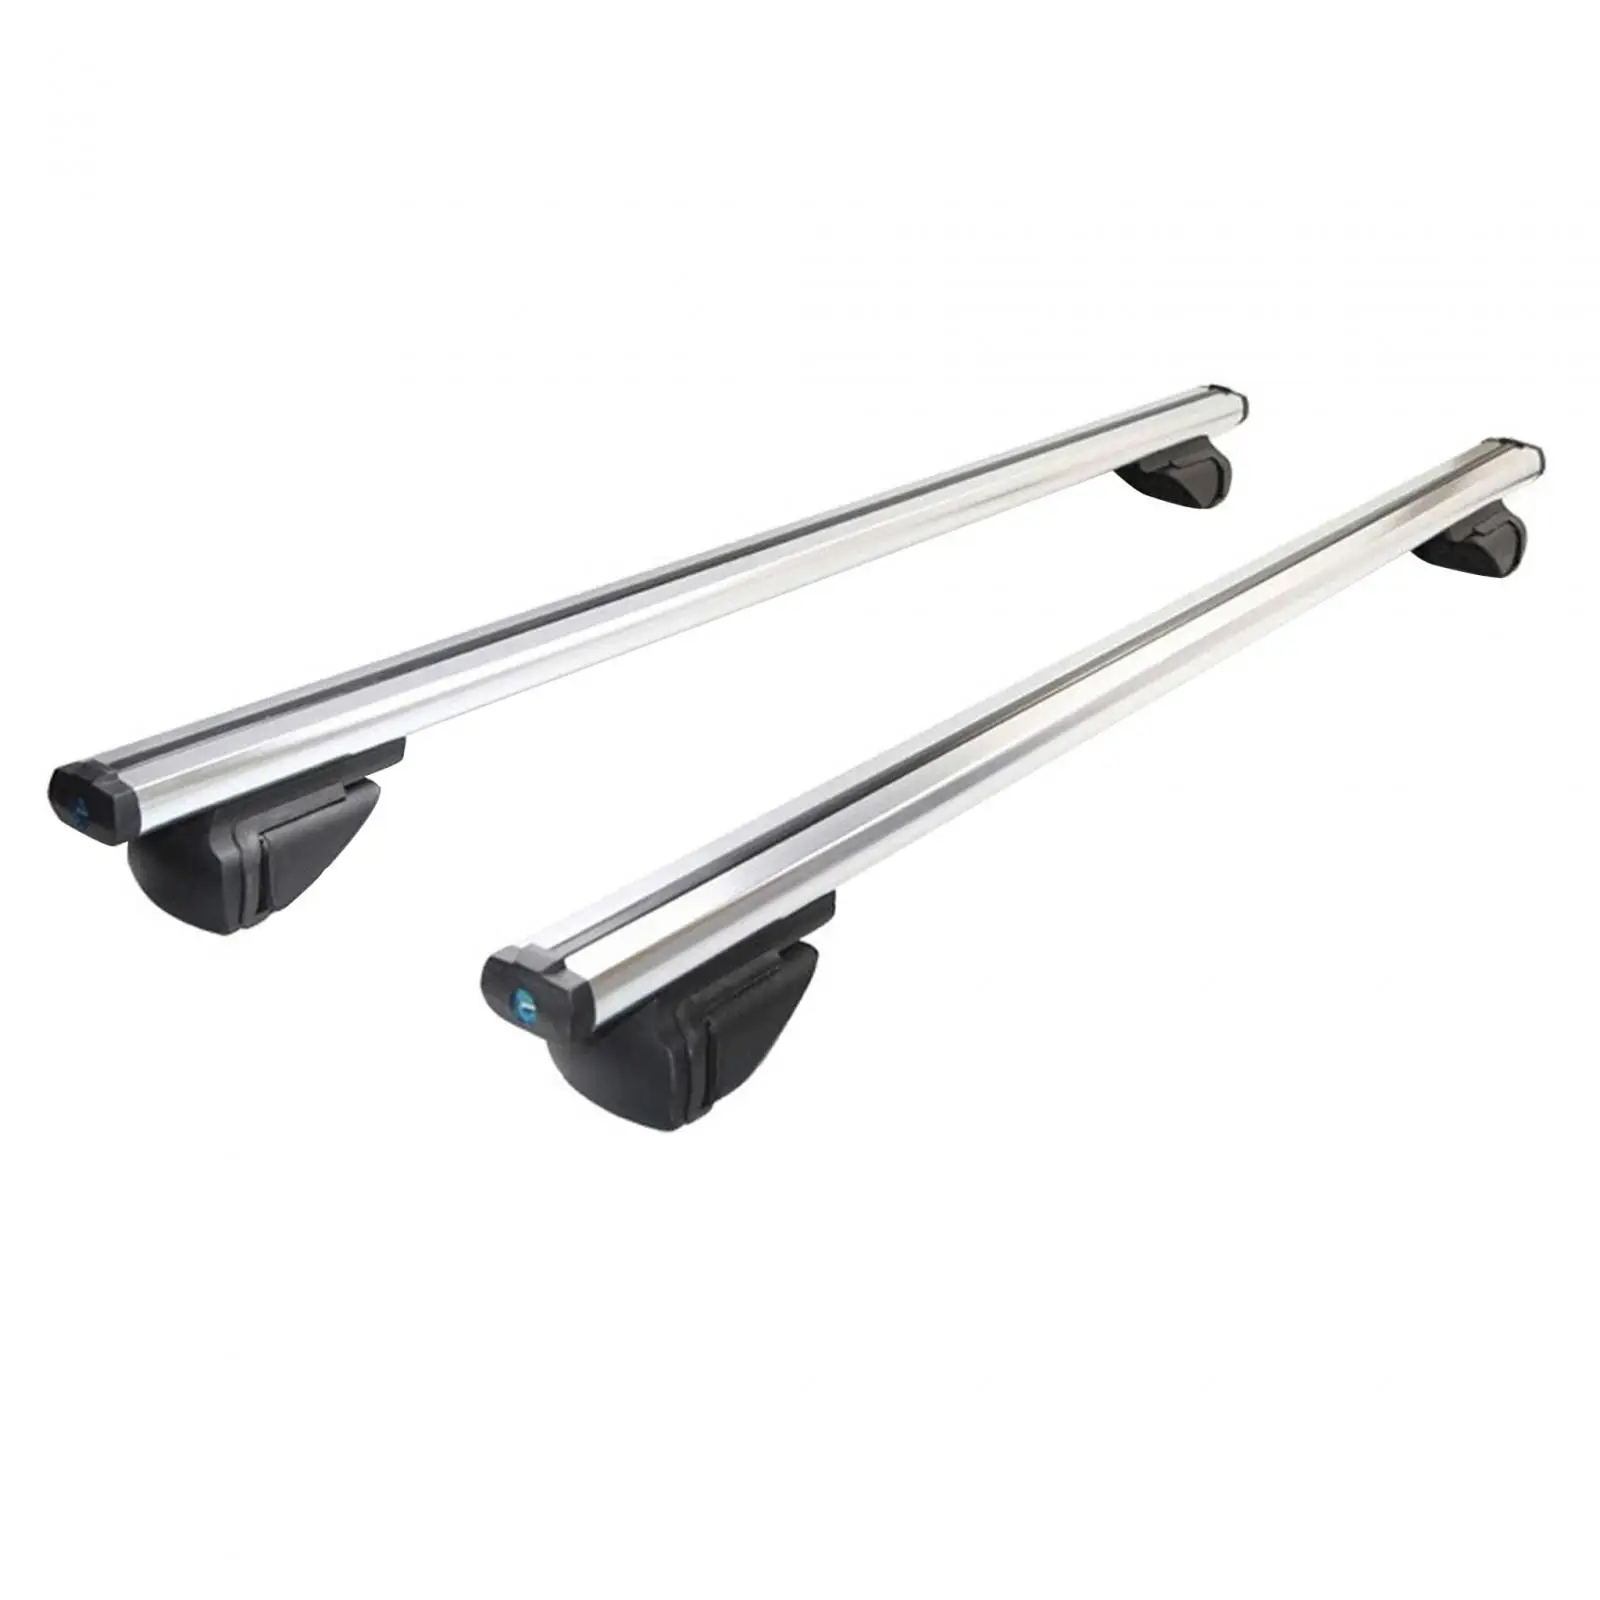 Car Roof Racks Cross Bars Easy to Install with Locks Heavy Duty Crossbars Top Roof Crossbar Holder for Most Car Automobiles